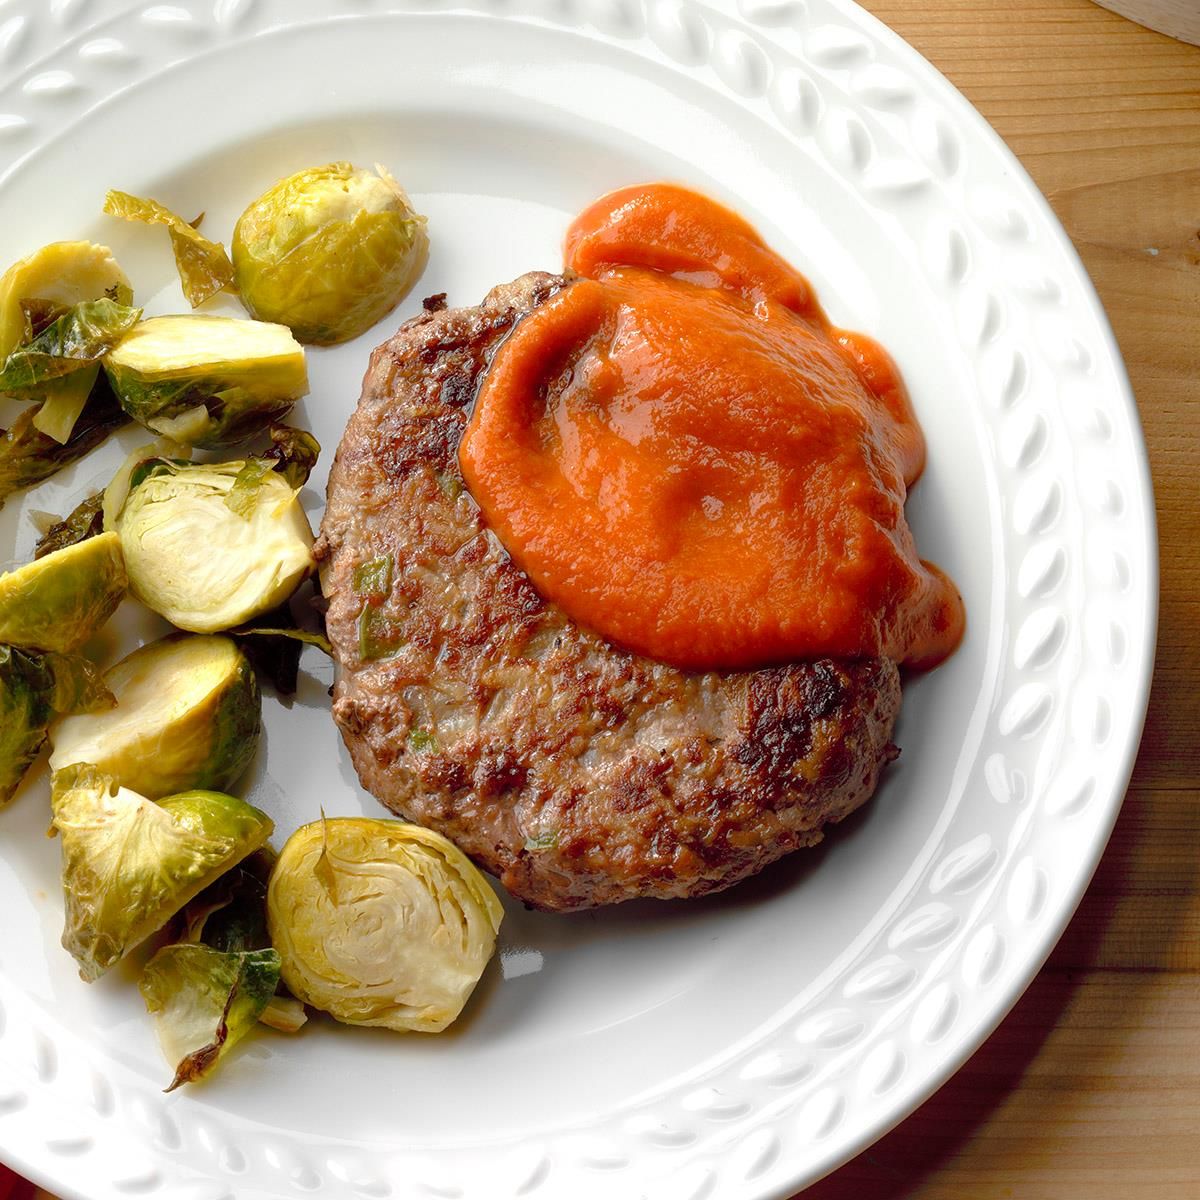 Meat and potato patties with brussels sprouts on a white plate.